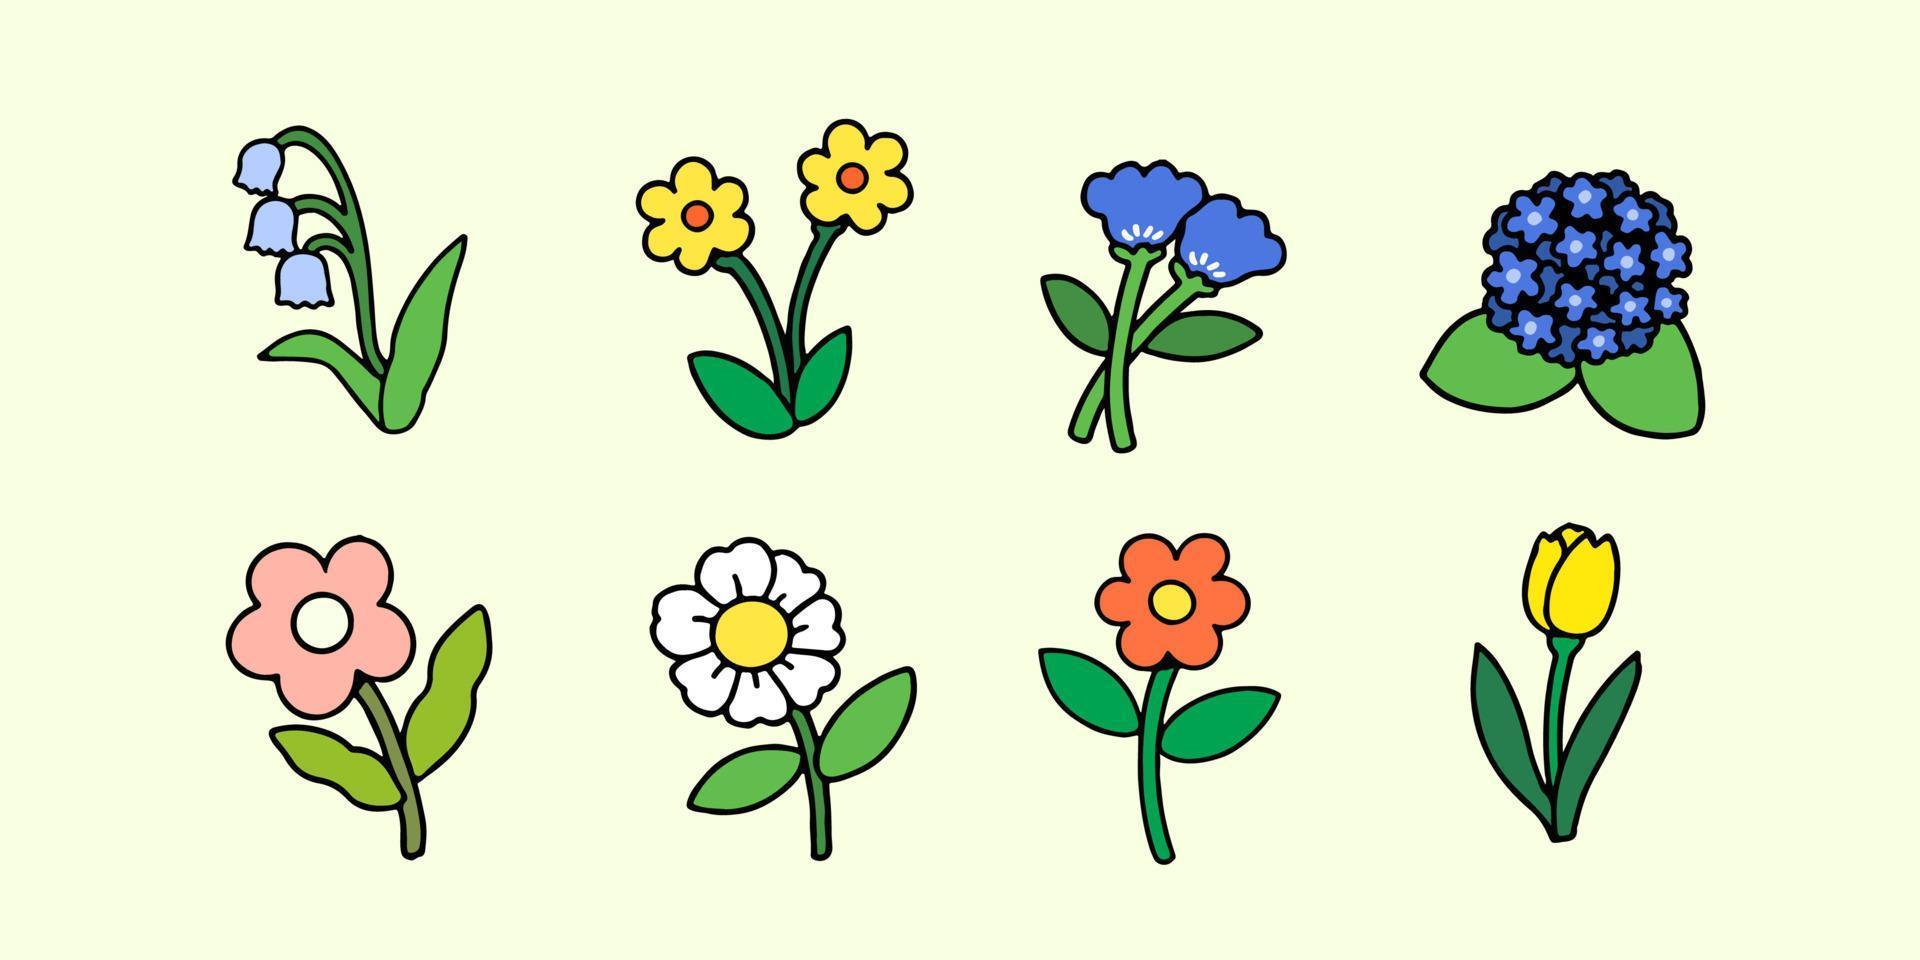 A Set of Hand-Drawn Flowers in Doodle Style, Isolated on a Background. Vector Illustration.